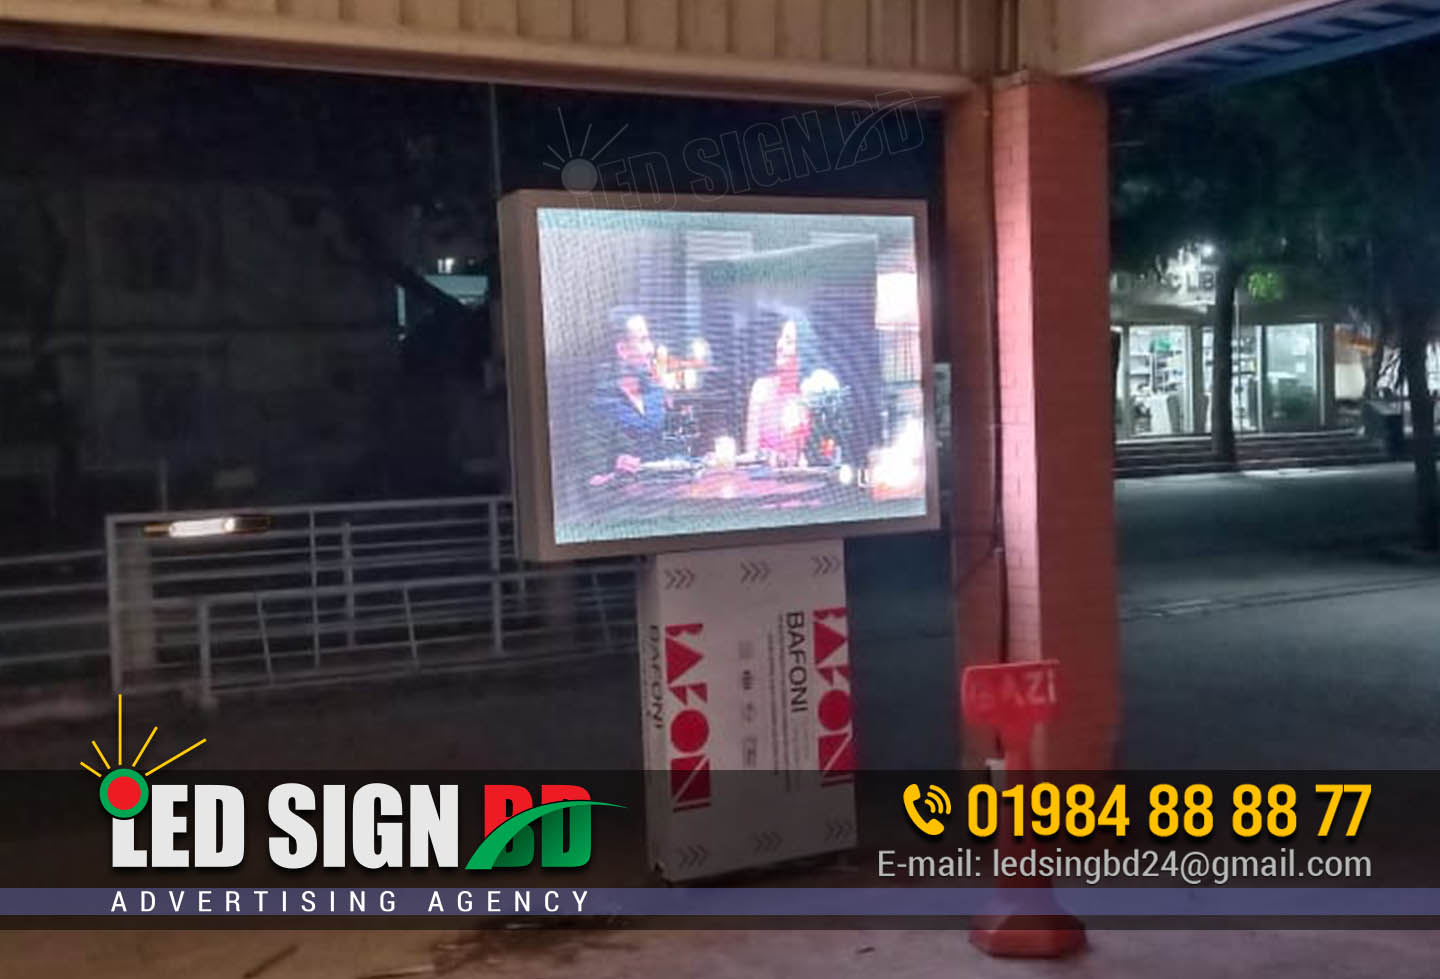 Led Display Board Suppliers in Bangladesh When it comes to finding the best led display board suppliers in Bangladesh, there are a few things to keep in mind. First, it is important to find a supplier who has experience in manufacturing and supplying led display boards. This will ensure that they are able to provide the highest quality product possible. Second, it is important to find a supplier who is willing to work with you to create a custom solution that meets your specific needs. There are a number of led display board suppliers in Bangladesh, but not all of them will be able to provide the same level of service or quality. By keeping the above factors in mind, you can be sure to find the best supplier for your needs. 1. Find out who the leading suppliers of LED display boards are in Bangladesh. 2. Research what types of LED display boards they offer. 3. Get an idea of the cost of LED display boards from Bangladesh suppliers. 4. Find out the minimum order requirements of Bangladeshi suppliers. 5. Compare the prices, products, and services of Bangladeshi suppliers with those of other countries. 1. Find out who the leading suppliers of LED display boards are in Bangladesh. The first step in finding out who the leading suppliers of LED display boards are in Bangladesh is to research the market. You can do this by searching online or contacting industry experts. Once you have a good understanding of the market, you can start to identify the leading suppliers. There are a few key factors to consider when identifying the leading suppliers of LED display boards in Bangladesh. Firstly, you need to consider the quality of the products that they offer. The best suppliers will offer high-quality products that are backed by a warranty or guarantee. Secondly, you need to consider the price of the products. The best suppliers will offer competitive prices that are in line with the market average. Thirdly, you need to consider the customer service and support that the supplier offers. The best suppliers will offer excellent customer service and support, so you can be sure that you will always be able to get the help and assistance you need. Finally, you need to consider the reputation of the supplier. The best suppliers will have a good reputation in the industry and will be known for providing high-quality products and excellent customer service. By considering all of these factors, you can be sure that you will be able to identify the leading suppliers of LED display boards in Bangladesh. 2. Research what types of LED display boards they offer. There are many LED display board suppliers in Bangladesh. Most of these suppliers offer a variety of LED display boards, including: -Indoor LED display boards -Outdoor LED display boards -Portable LED display boards -Rentable LED display boards Each type of LED display board has its own unique benefits and applications. Indoor LED display boards are typically used in retail settings, while outdoor LED display boards are designed for use in harsh weather conditions. Portable LED display boards are ideal for events and trade shows, and rentable LED display boards are perfect for temporary displays. When choosing an LED display board supplier in Bangladesh, it is important to research the different types of LED display boards they offer. This will ensure that you find the perfect LED display board for your needs. 3. Get an idea of the cost of LED display boards from Bangladesh suppliers. There are many suppliers of LED display boards in Bangladesh and the cost of these products can vary significantly. It is important to get an idea of the cost of the product before purchasing it from a supplier. many suppliers offer discounts for bulk purchases. The cost of an LED display board will vary depending on the size, quality and features of the product. The larger the size of the product, the more expensive it will be. The quality of the product will also affect the price. The better the quality, the more expensive the product will be. The features of the product will also affect the price. Some features, such as the ability to display multiple colors, may increase the price of the product. Other features, such as the ability to be controlled remotely, may also increase the price. When purchasing an LED display board from a supplier in Bangladesh, it is important to consider all of these factors to ensure that you are getting the best possible price for the product. 4. Find out the minimum order requirements of Bangladeshi suppliers. In Bangladesh, the minimum order requirements for suppliers of LED display boards may vary depending on the supplier. Some suppliers may require a minimum order of 100 pieces, while others may require a minimum order of 1,000 pieces. To find out the minimum order requirements of Bangladeshi suppliers, it is best to contact the supplier directly. 5. Compare the prices, products, and services of Bangladeshi suppliers with those of other countries. In order to find the best supplier for your business, it is important to compare the prices, products, and services of suppliers from different countries. When it comes to comparing the prices of Bangladeshi suppliers with those from other countries, there are a few things you should keep in mind. First, it is important to remember that the cost of living in Bangladesh is lower than in many other countries. This means that Bangladeshi suppliers may be able to offer products and services at a lower price than suppliers from other countries. Second, it is important to compare the quality of the products and services offered by Bangladeshi suppliers with those offered by other suppliers. In many cases, the quality of products and services offered by Bangladeshi suppliers is just as good as, if not better than, the quality of products and services offered by other suppliers. Third, it is important to consider the lead time when comparing the prices of Bangladeshi suppliers with those of other countries. In general, Bangladeshi suppliers have a shorter lead time than suppliers from other countries. This means that you may be able to get your products and services faster if you choose to work with a Bangladeshi supplier. fourth, you should also compare the customer service of Bangladeshi suppliers with that of other countries. In many cases, Bangladeshi suppliers offer better customer service than suppliers from other countries. Finally, it is important to compare the payment terms of Bangladeshi suppliers with those of other countries. In general, Bangladeshi suppliers require a lower down payment than suppliers from other countries. This means that you may be able to save money by choosing to work with a Bangladeshi supplier. After considering all the options, we have decided that the best led display board supplier in Bangladesh is ABC Corporation. Their products are of the highest quality and their customer service is excellent. We are confident that they will be able to provide us with the best possible service and product. Led display board price in bangladesh. Outdoor led display screen price in bangladesh. Pvc sign board price in bangladesh. Led display panel price in bangladesh. Digital led sign board. Neon sign board price in bangladesh. Led display price in bangladesh. Acrylic sign board price in bangladesh. Led display panel price in bangladesh. Outdoor led display screen price in bangladesh. Led display price in bangladesh. Led display board. Led sign board bd. Neon sign board price in bangladesh. P10 led display price in bangladesh. Digital led sign board. Led moving sign board. Led display board suppliers in bangladesh. Led moving display board. Led display board price in bangladesh. Led moving display. Led moving display board dhaka bangladesh. Led screen rent in bangladesh. Led tv display price. Led tv display panel price in bangladesh. 32 led tv display panel price in bangladesh. 24 led tv display panel price in bangladesh. Sony led tv display panel price in bangladesh. Walton led tv panel price in bangladesh. Led tv bangladesh price. Samsung tv panel price in bangladesh. Led display tv. Led display tv rental. Led display tv sign board. Led display tv box. Led display tv for sale. Micro led display tv. Mini led display tv. Small led display tv. Samsung led tv display problem. Led tv white display problem. Led flexible display tv. Led digital display tv. Led moving sign board. Led moving stand. Led screen rent in bangladesh. Moving led tv stand. Led stand moving display and trivision bd. Led tv stand price in bangladesh. Led moving sign boar. Led moving stand. Led screen rent in bangladesh. Moving led tv stand Led stand moving display and trivision bd. Led tv stand price in bangladesh. Advertising agency in dhaka. List of advertising agency in bangladesh. Top advertising company in bangladesh. Top 10 advertising agency in bangladesh. Billboard advertising bd. Newspaper advertising agency in dhaka bangladesh. Billboard advertising cost in bangladesh. Specialized advertising agency in bangladesh. Billboard advertising in bangladesh. Billboard advertising cost in bangladesh. Billboard cost in bangladesh. Billboard rent in dhaka.